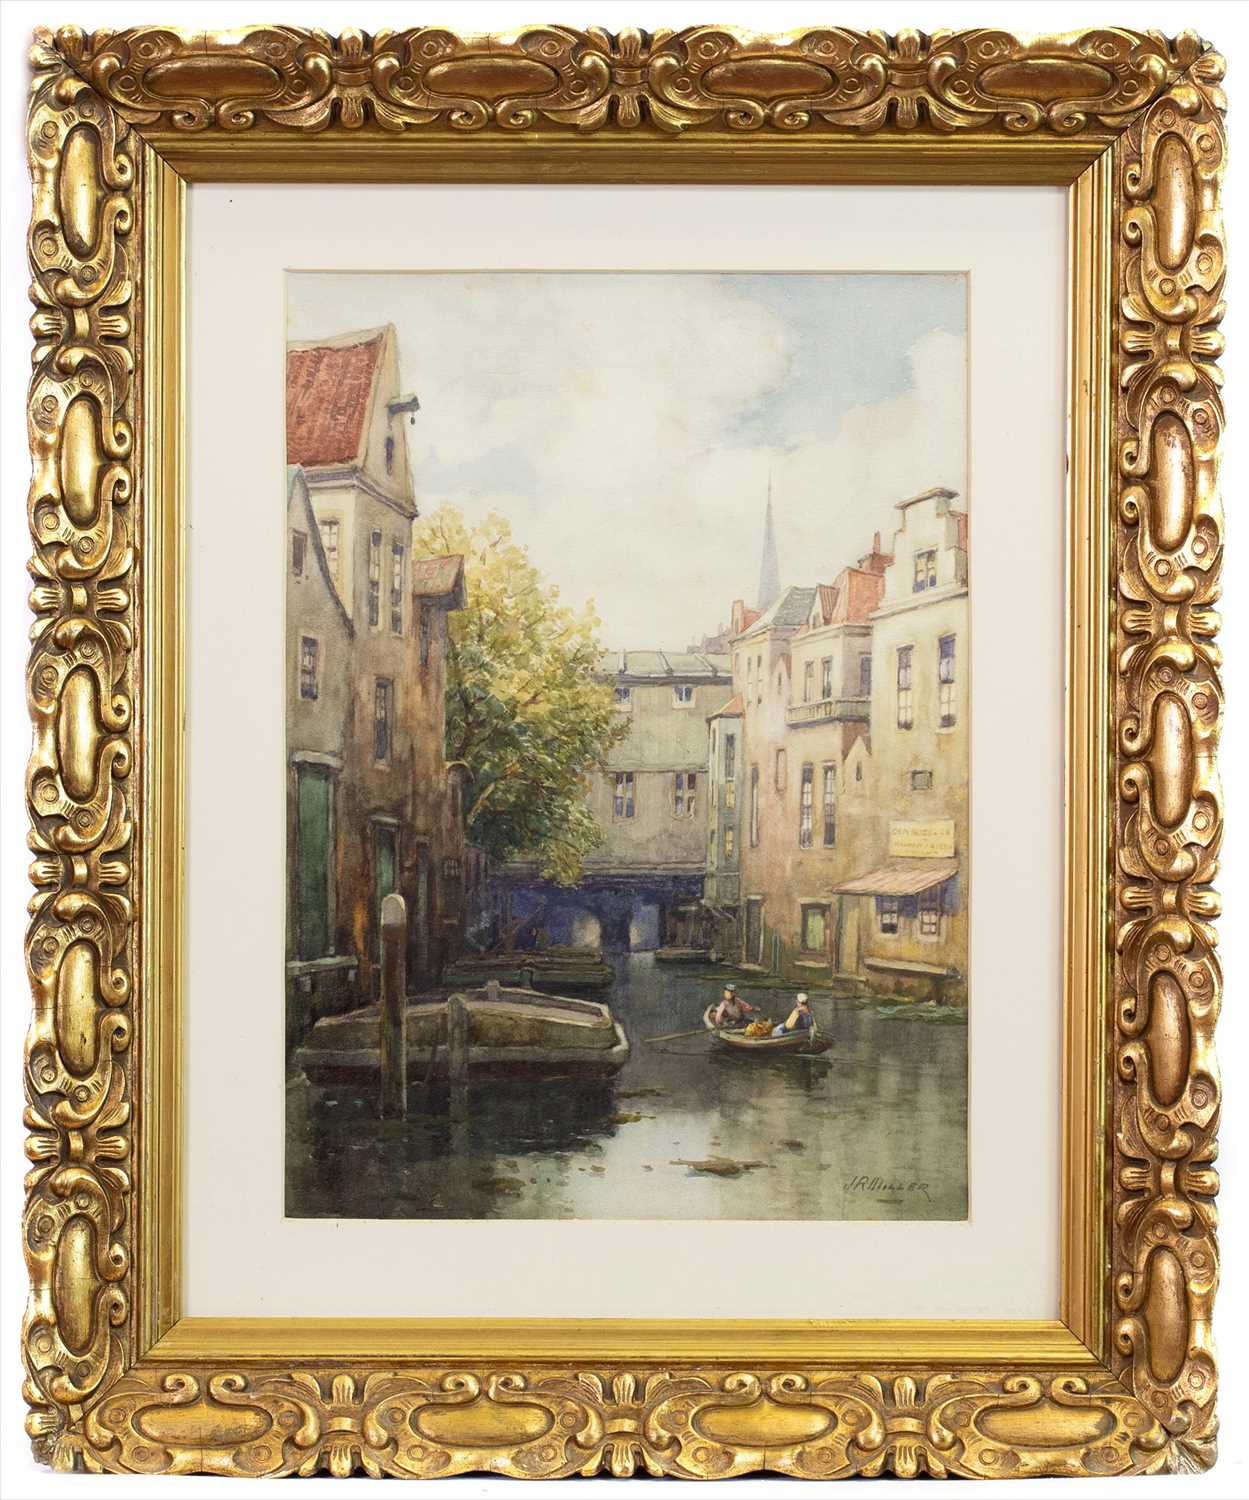 Lot 427 - ROWING BOAT ON A DUTCH CANAL, A WATERCOLOUR BY JAMES ROBERTSON MILLER